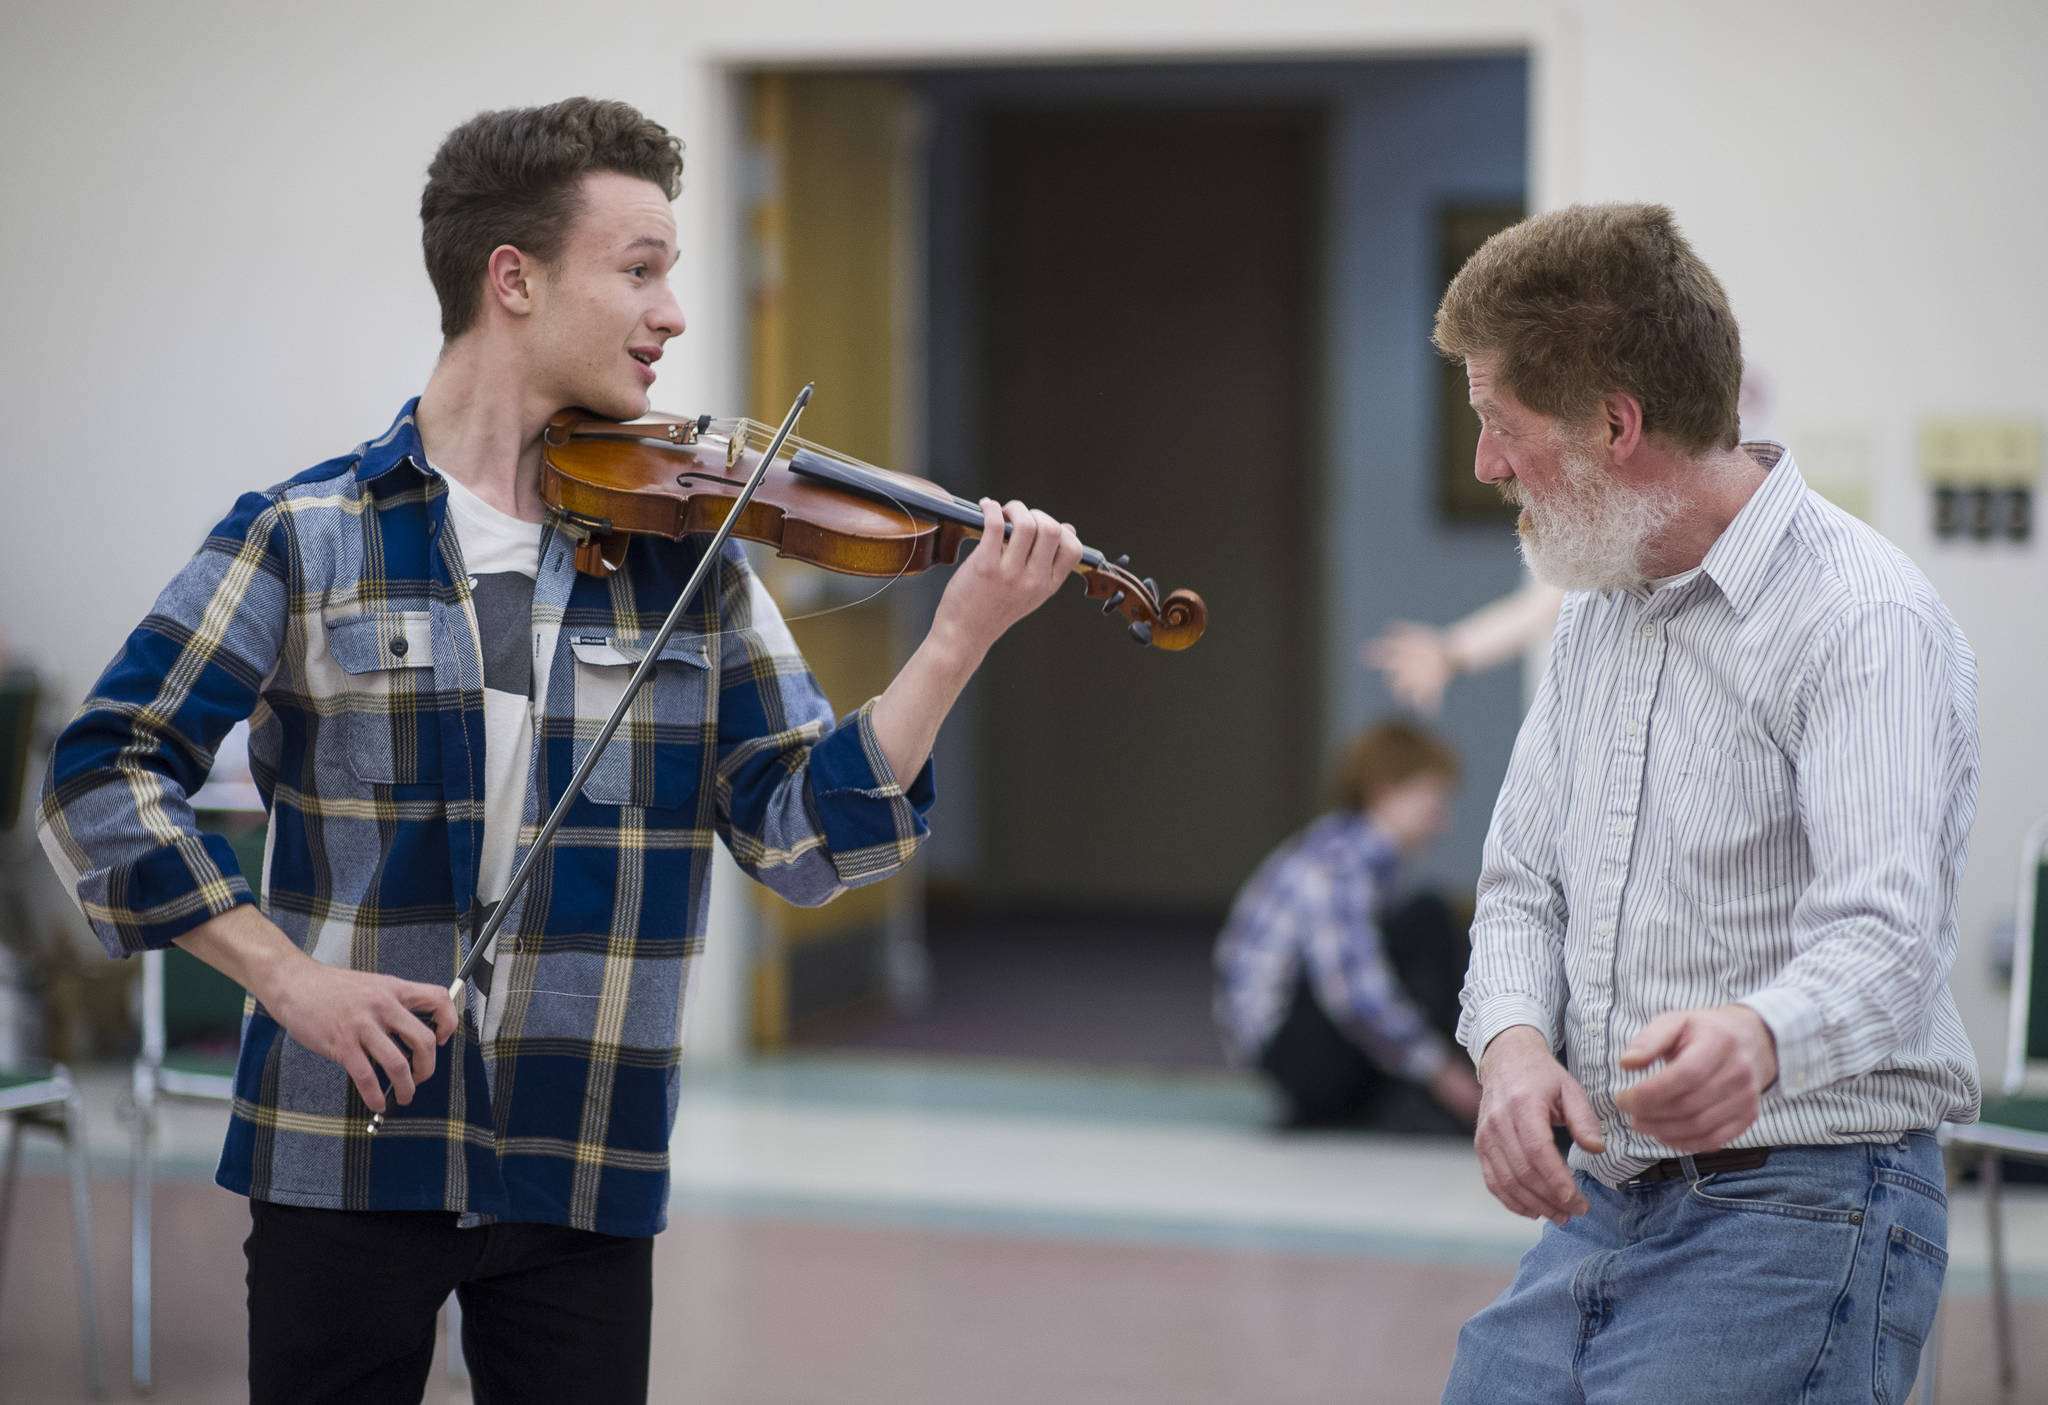 Solomon Unzicker as the Fiddler of the Roof with Michael Wittig as Tevye at the tehearsal of Latitude 58’s production of “Fiddler on the Roof” at St. Ann’s Hall on Thursday, Nov. 9, 2017. (Michael Penn | Capital City Weekly)